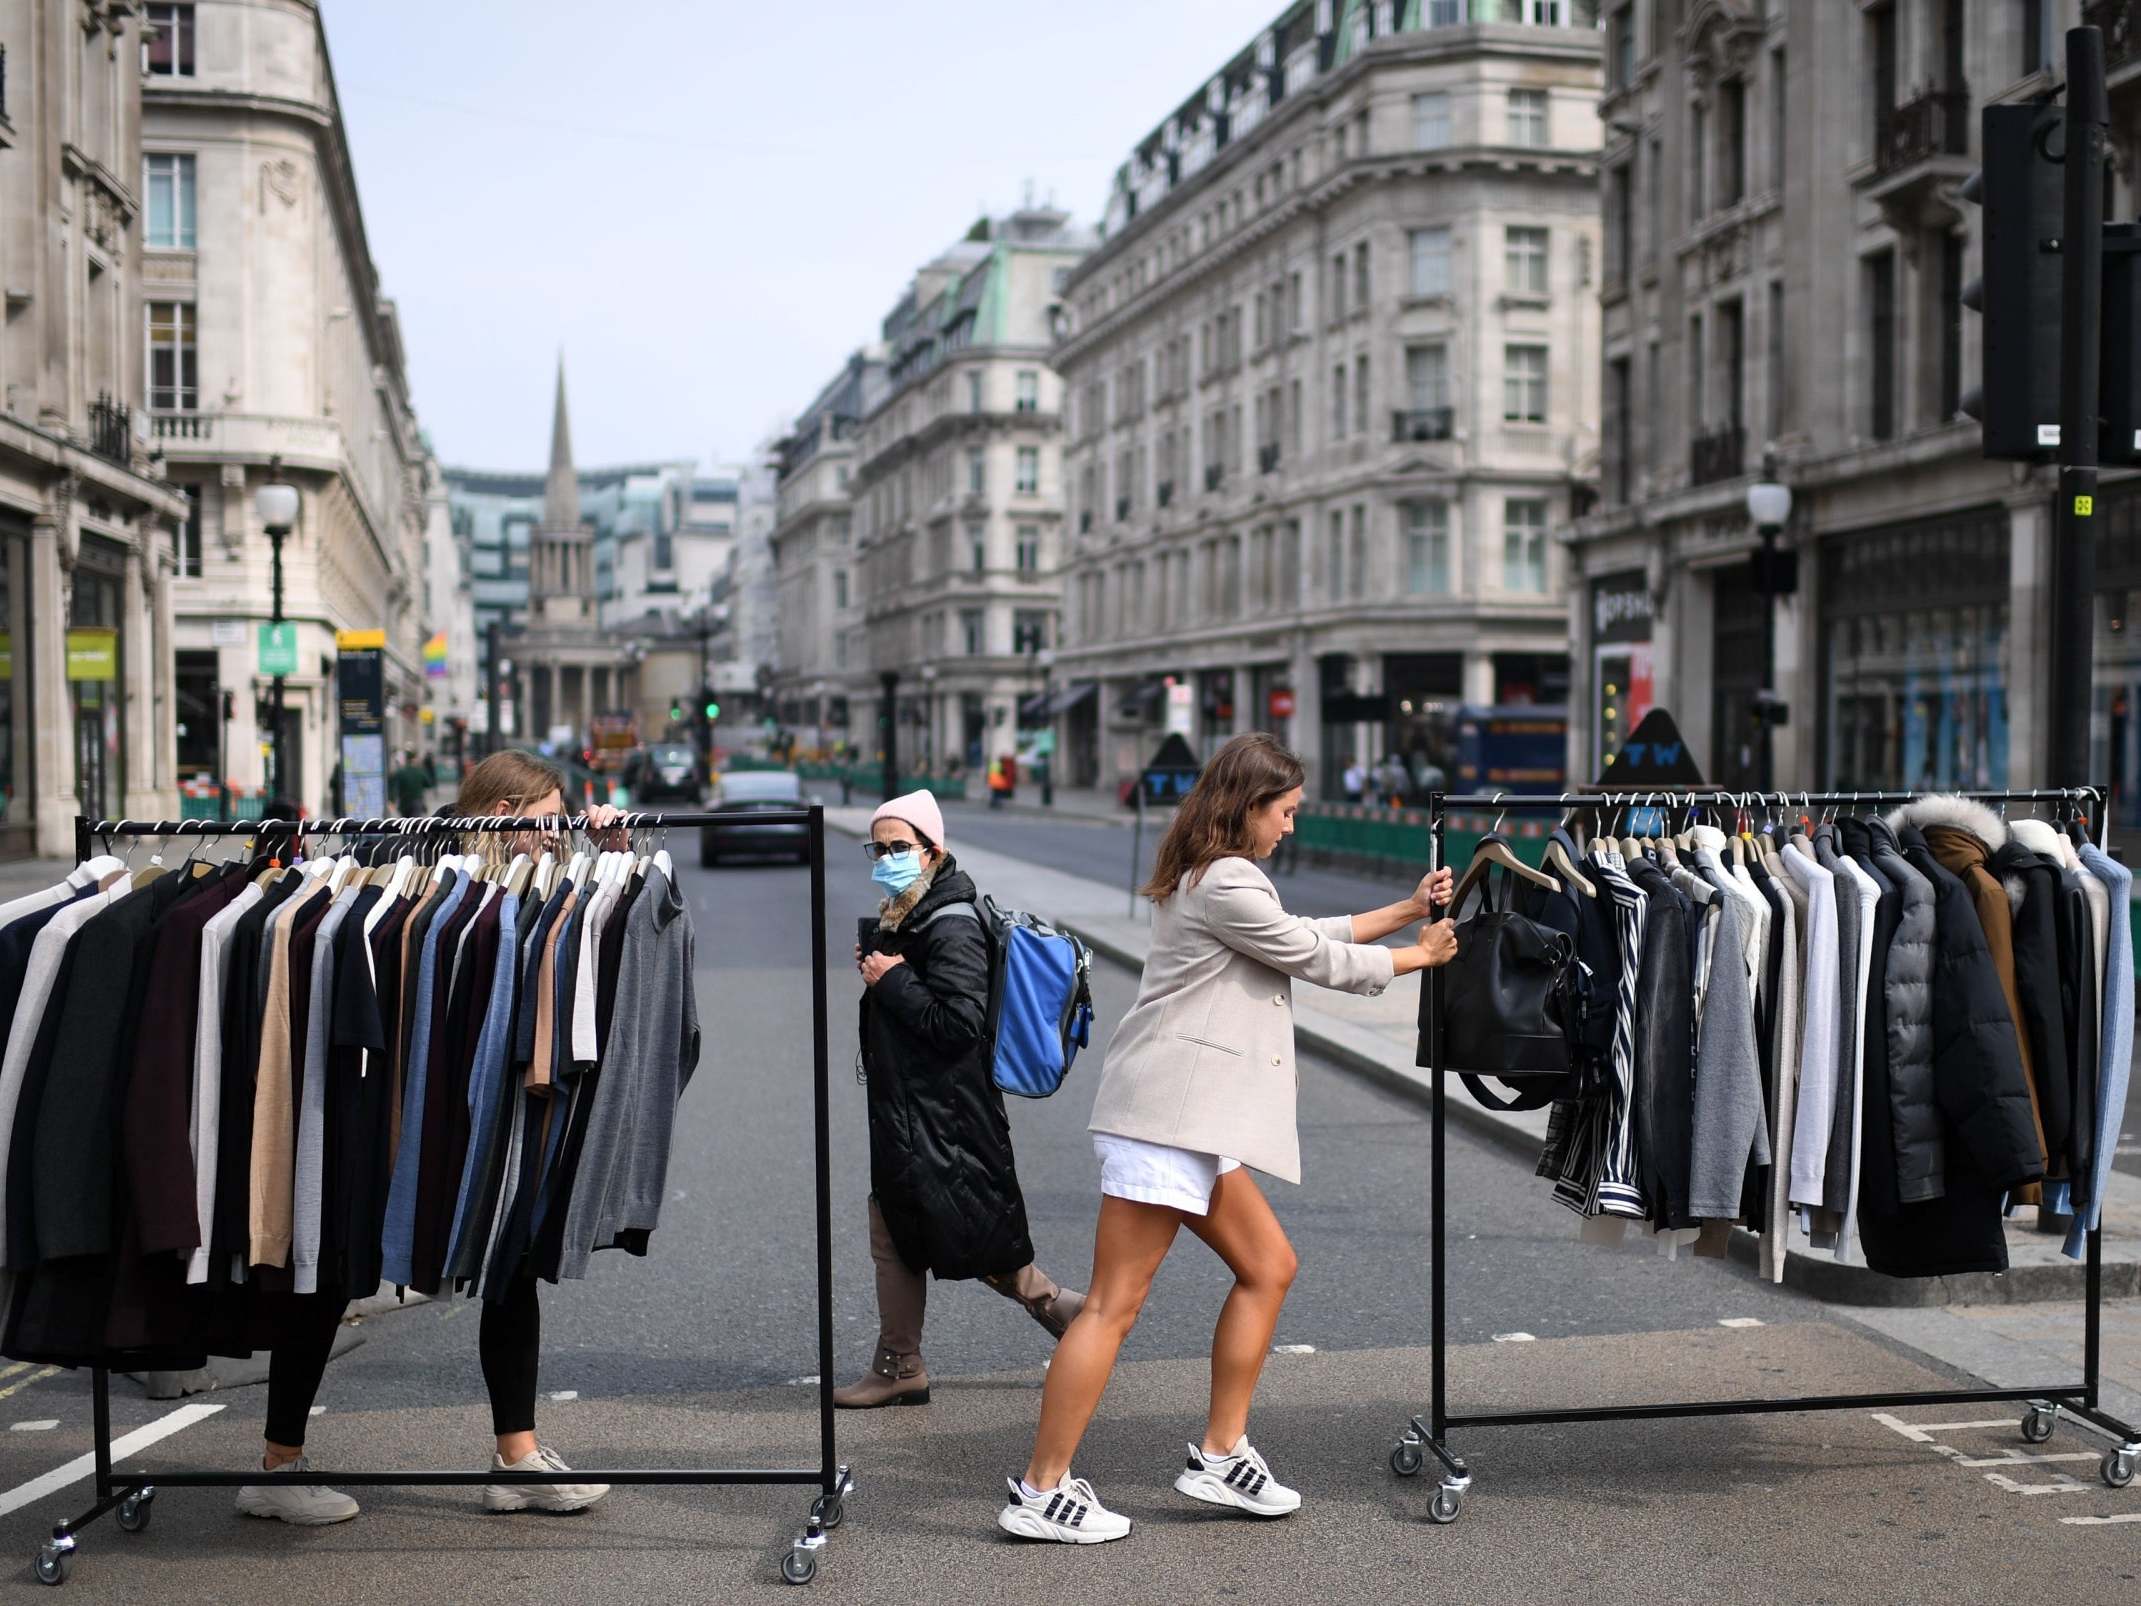 Retail workers move rails of clothes between stores on Oxford Street ahead of reopening yesterday